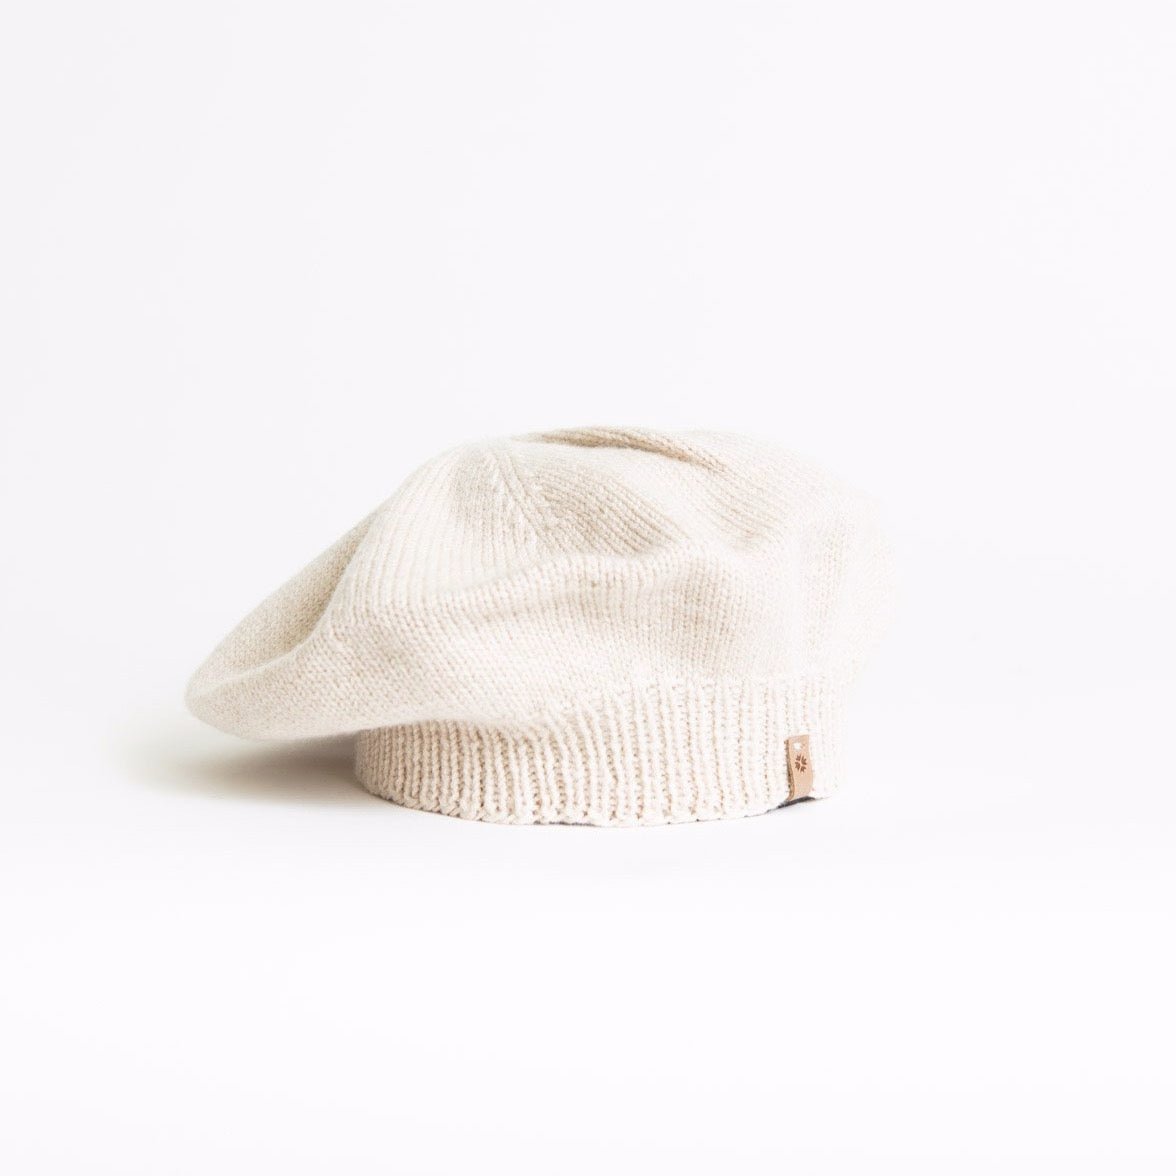 A slouch style hat with fitted ribbed collar. The Merino Beret in Almond White is designed by Dinadi and hand knitted in Kathmandu, Nepal.